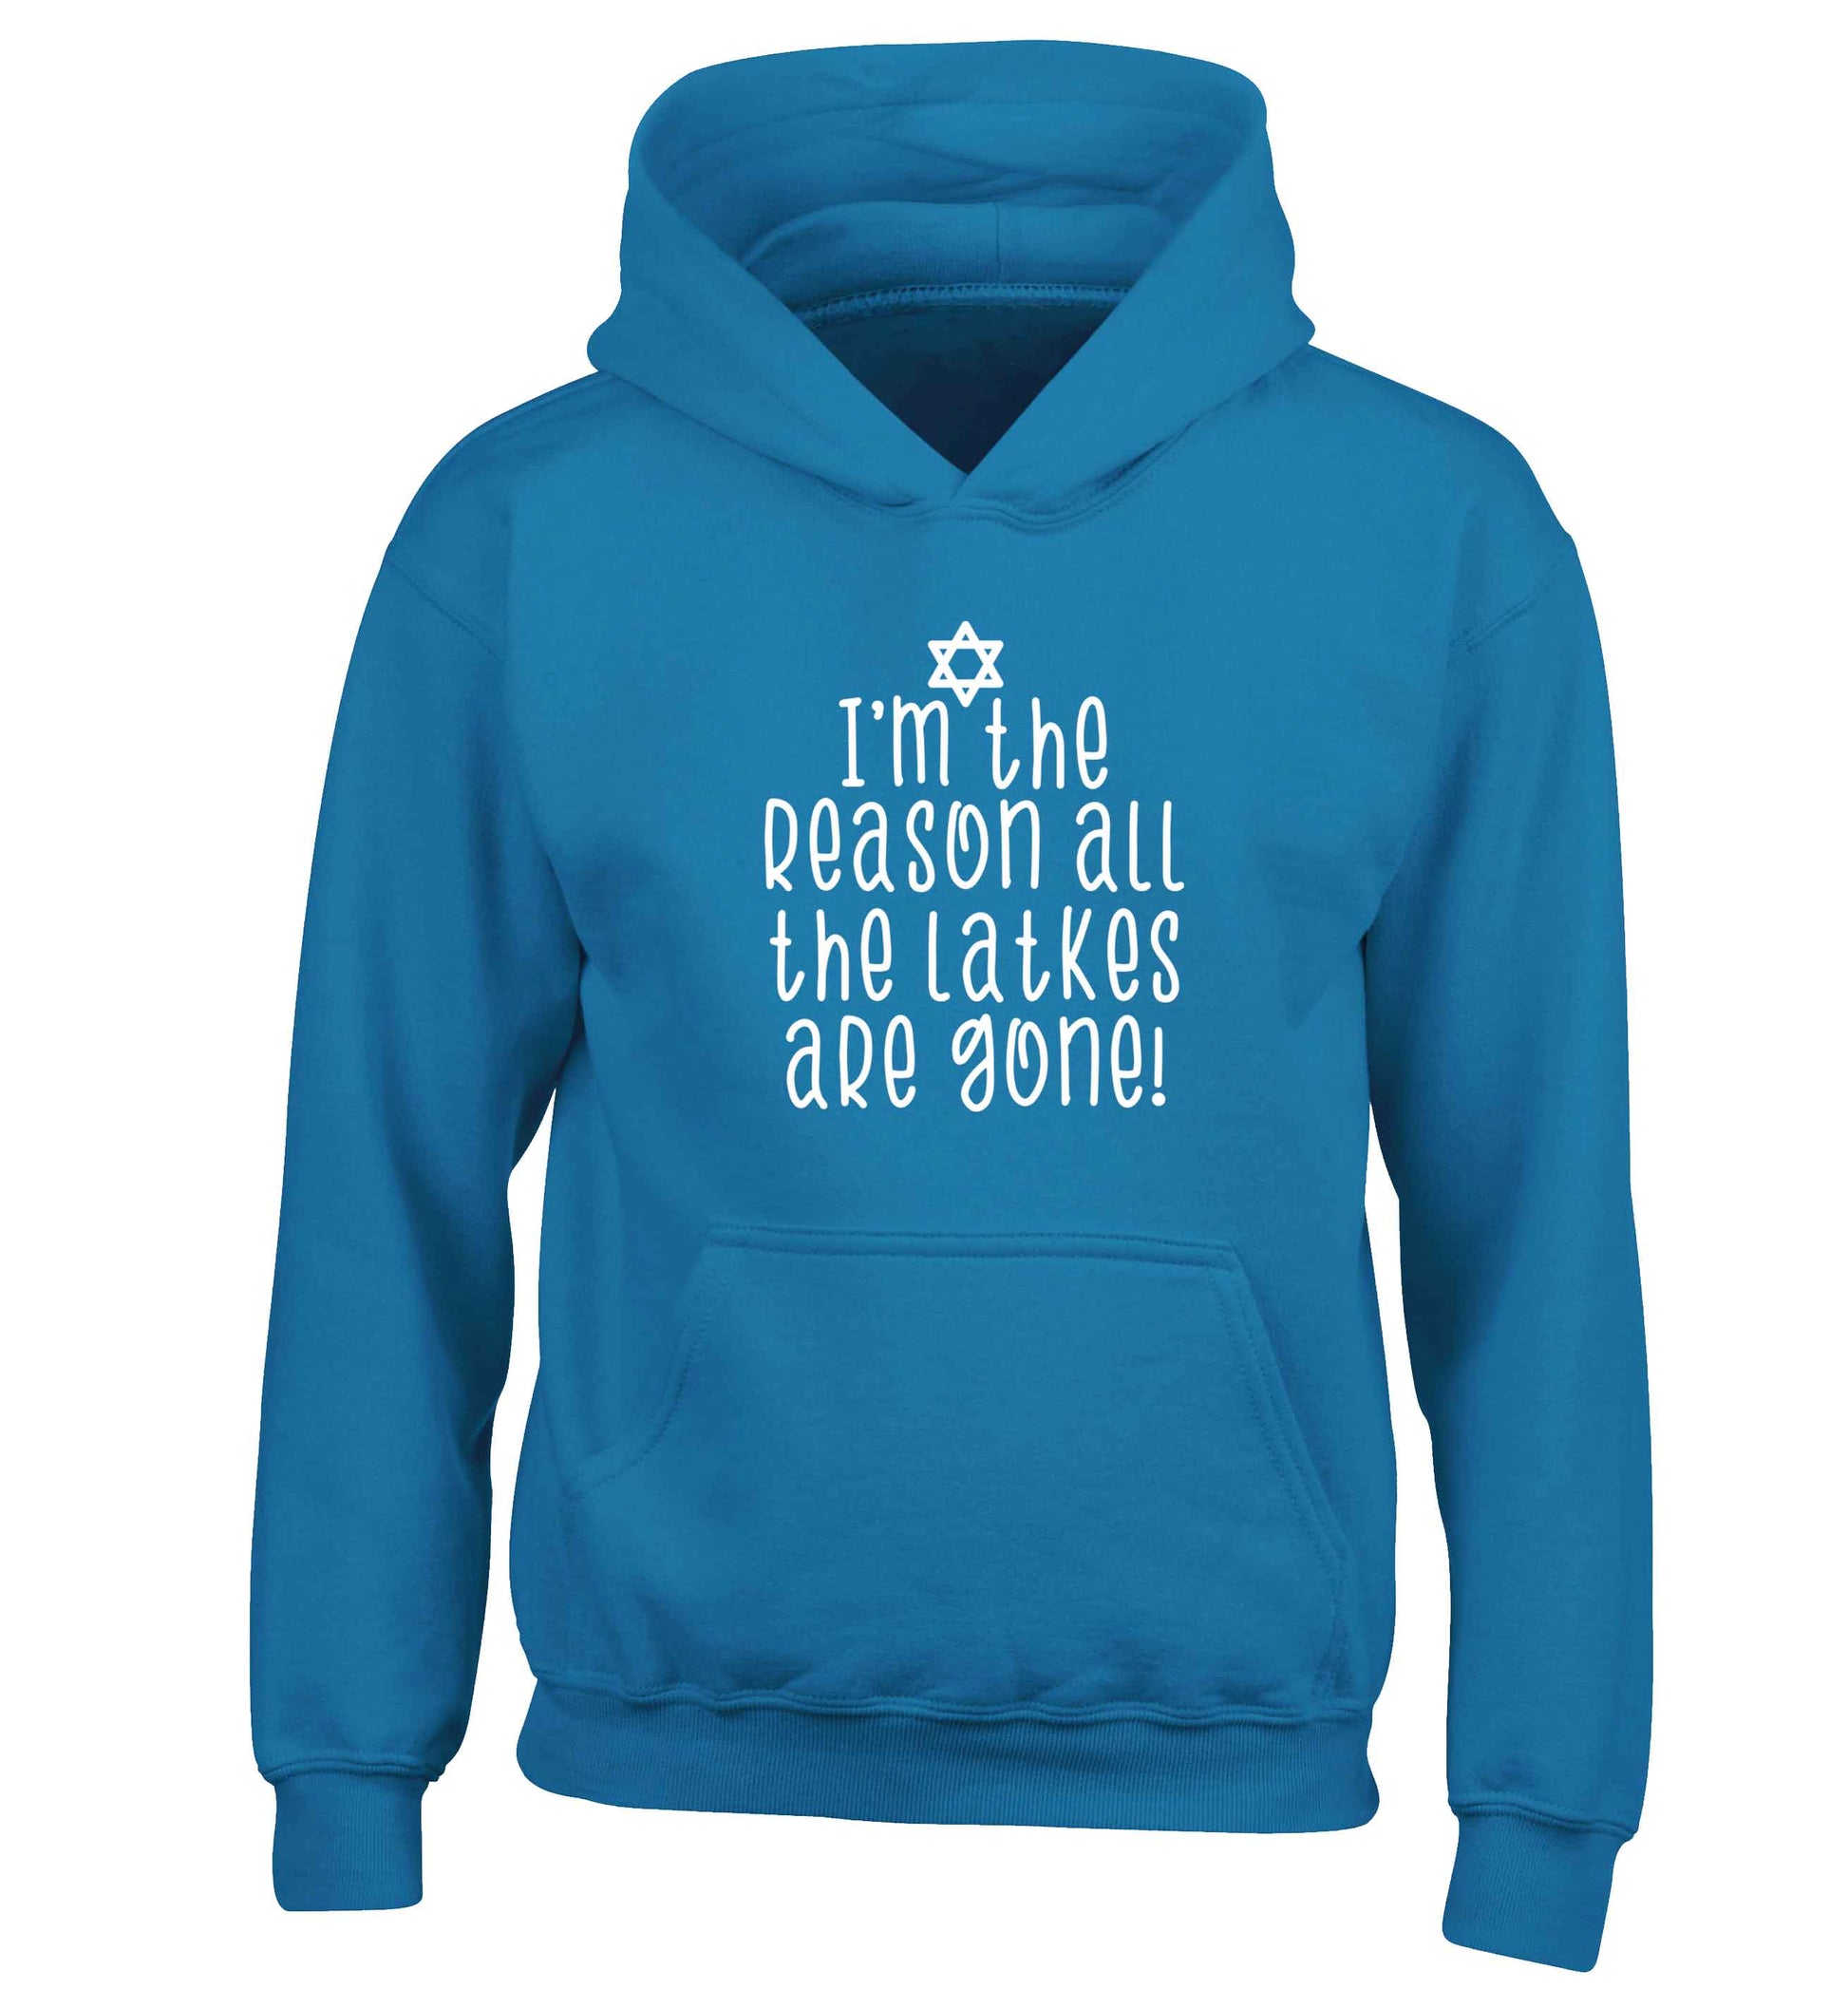 I'm the reason all the latkes are gone children's blue hoodie 12-13 Years